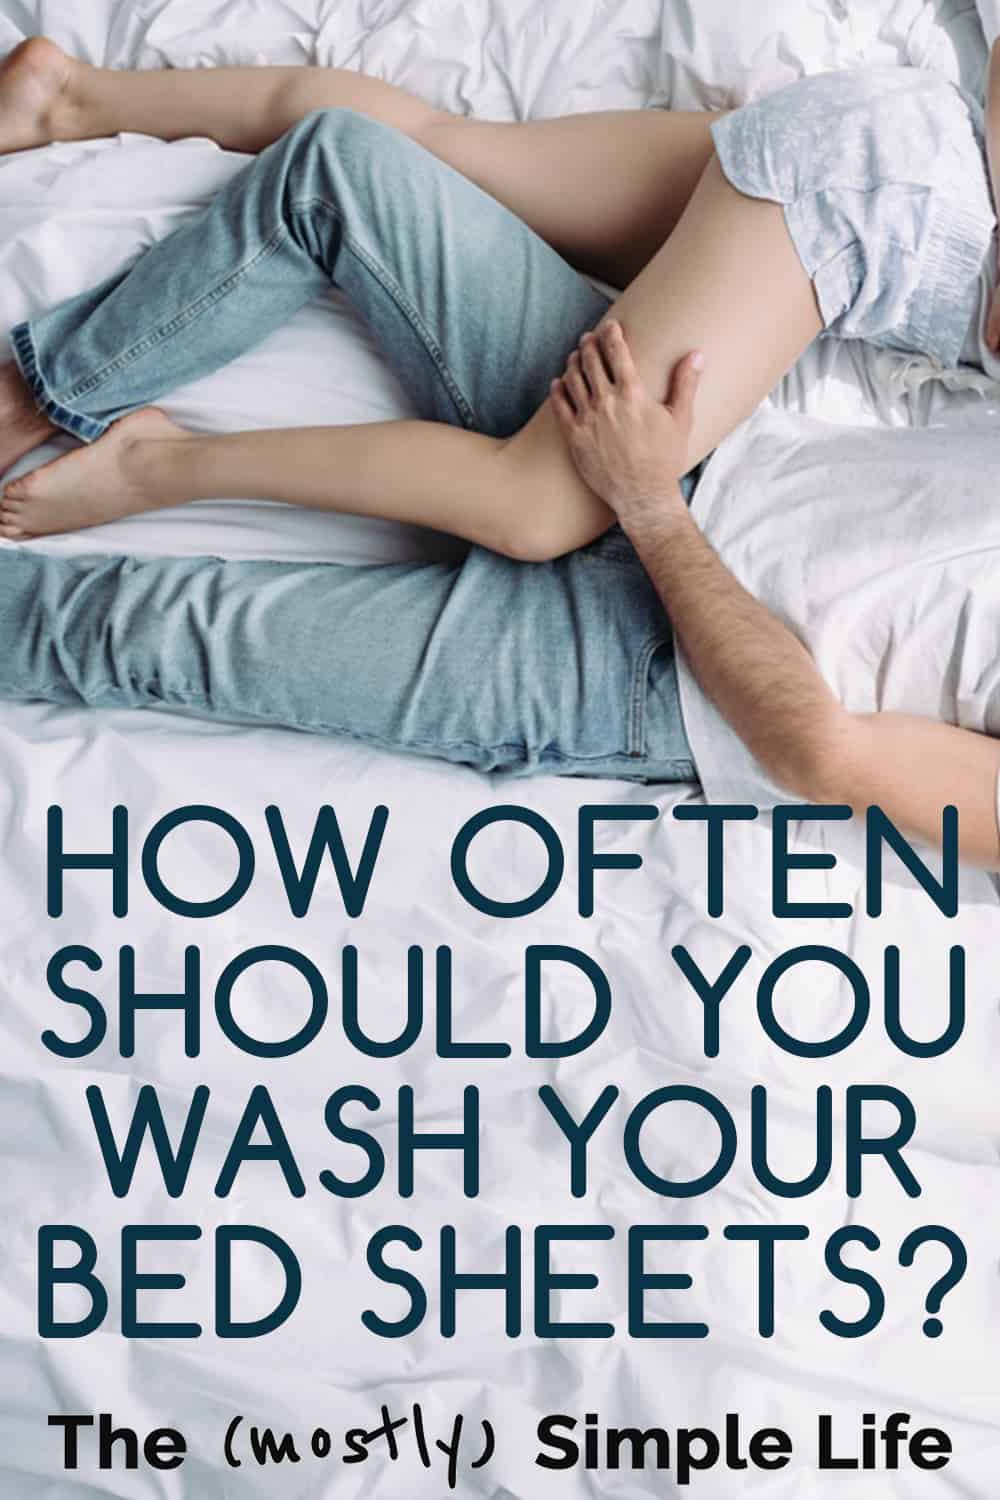 Wash Your Bed Sheets Every 1 to 3 Weeks (Take the Quiz!)